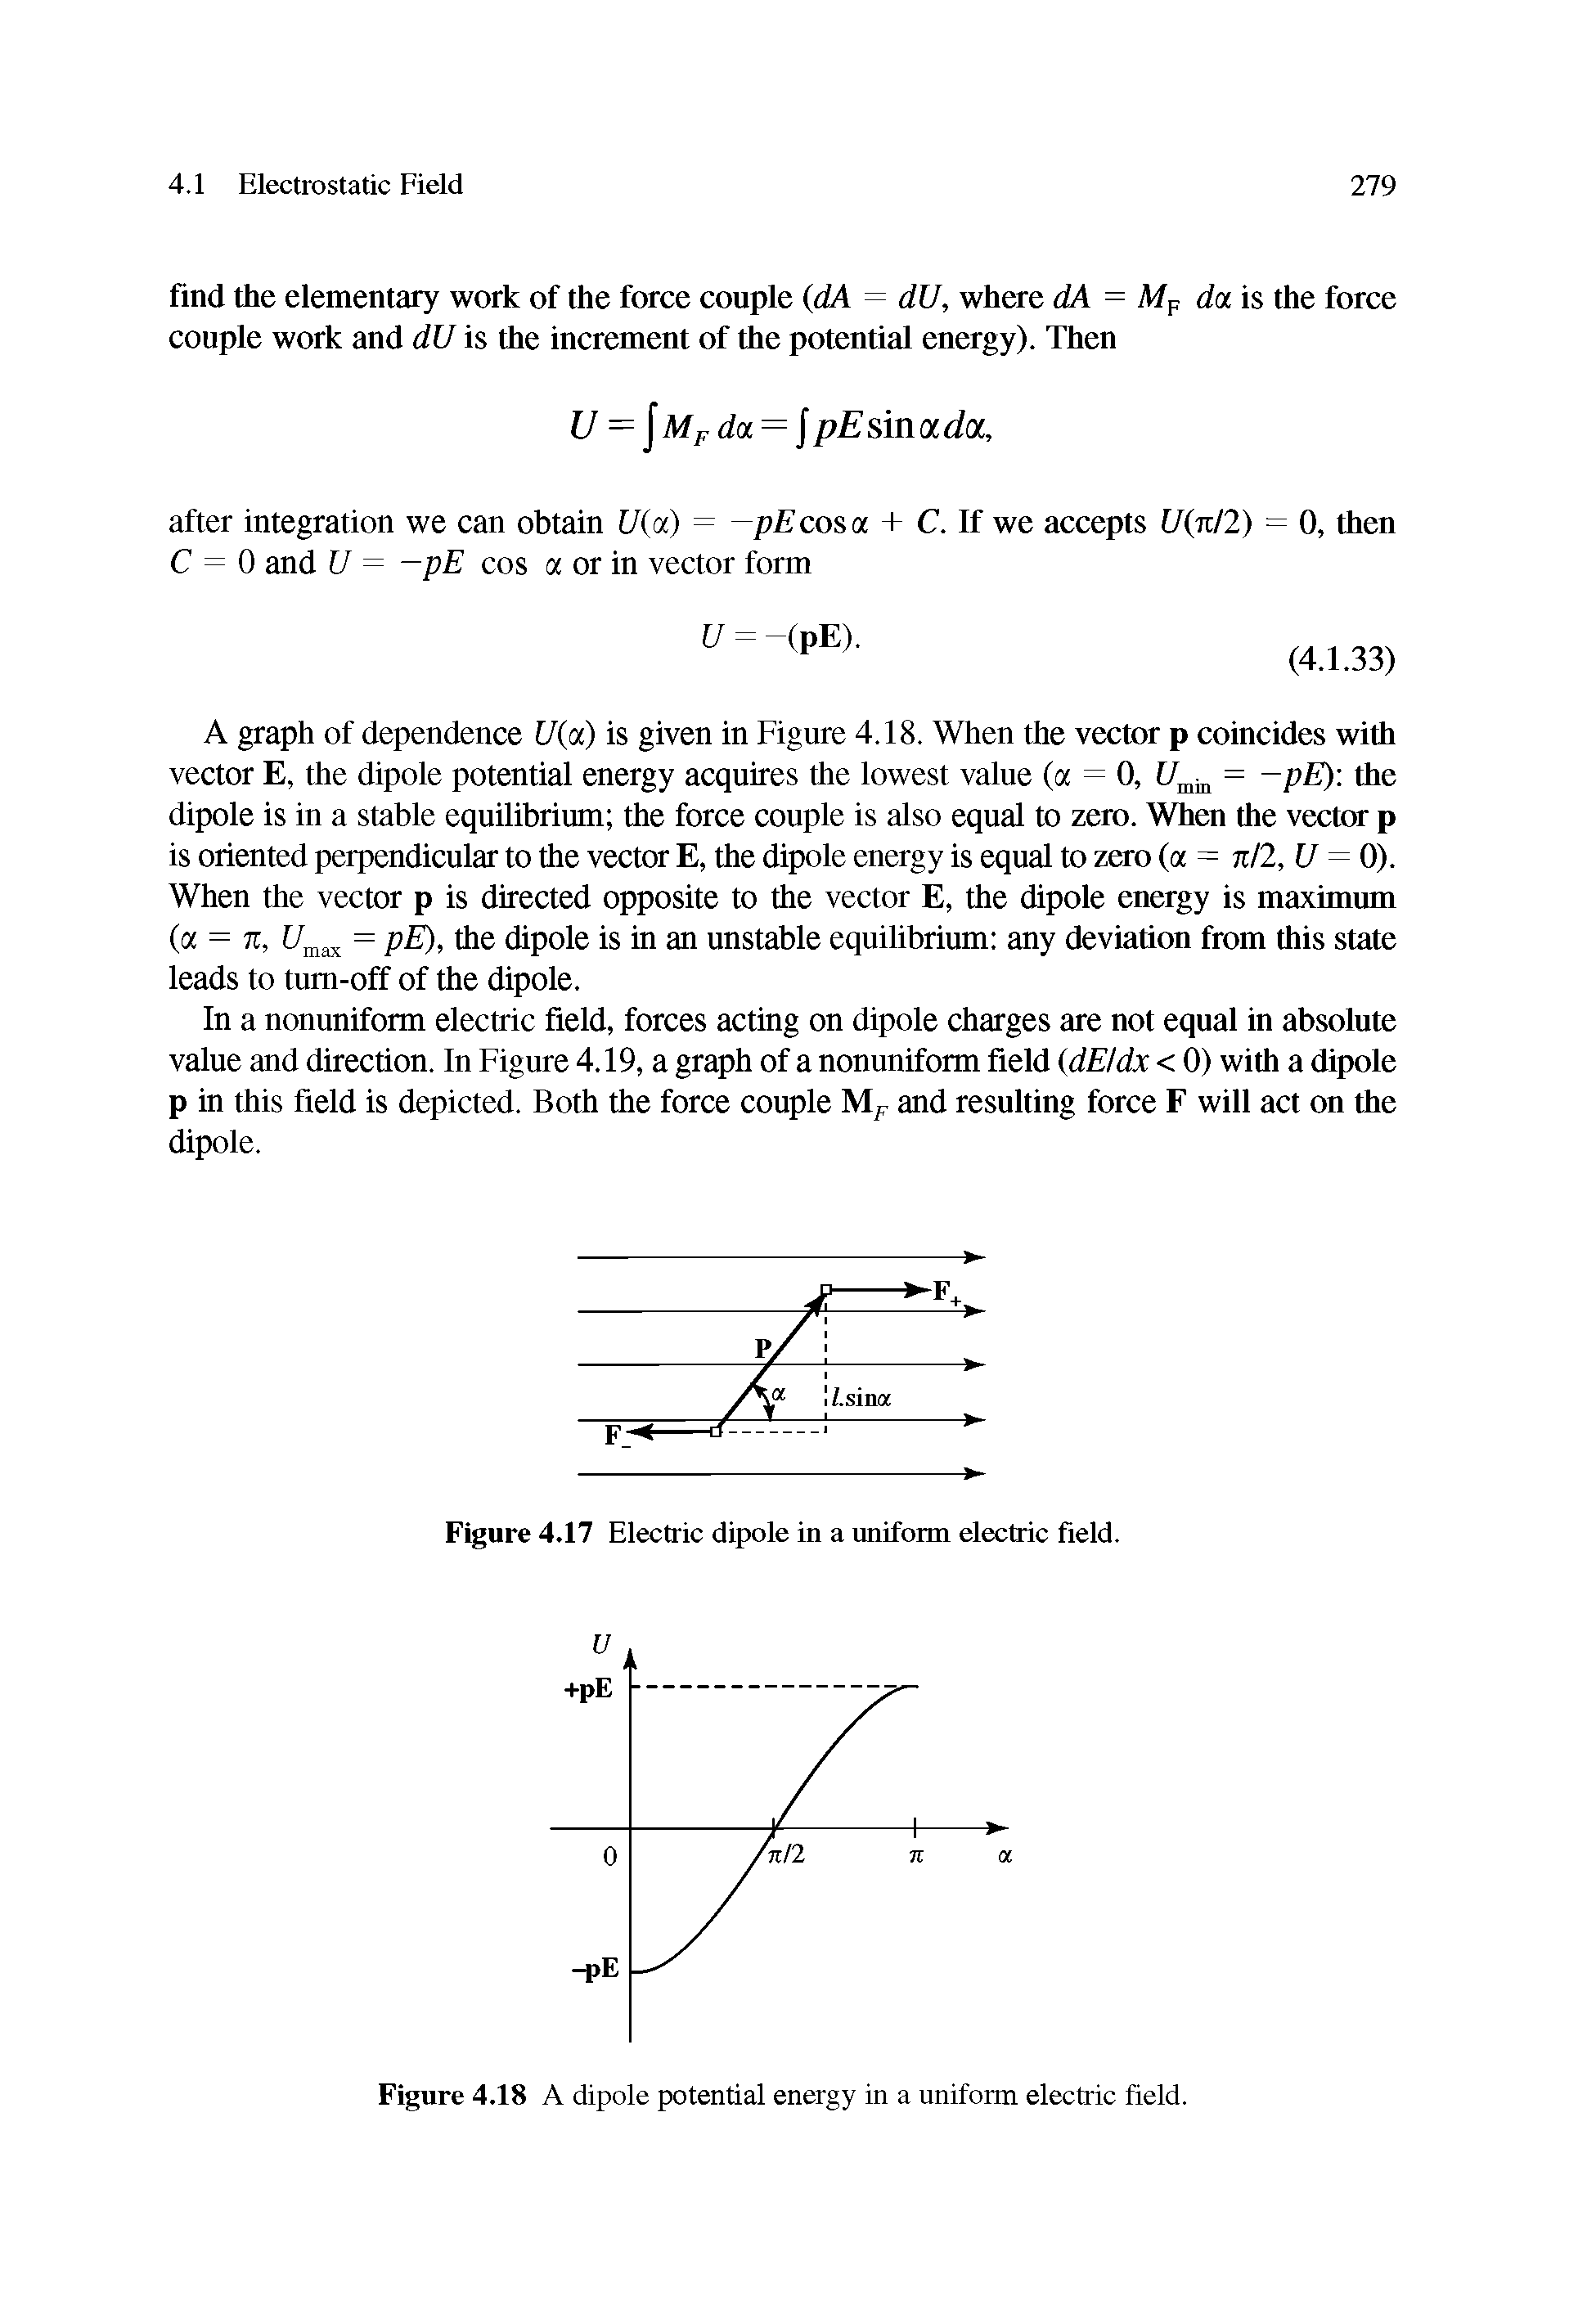 Figure 4.18 A dipole potential energy in a uniform electric field.